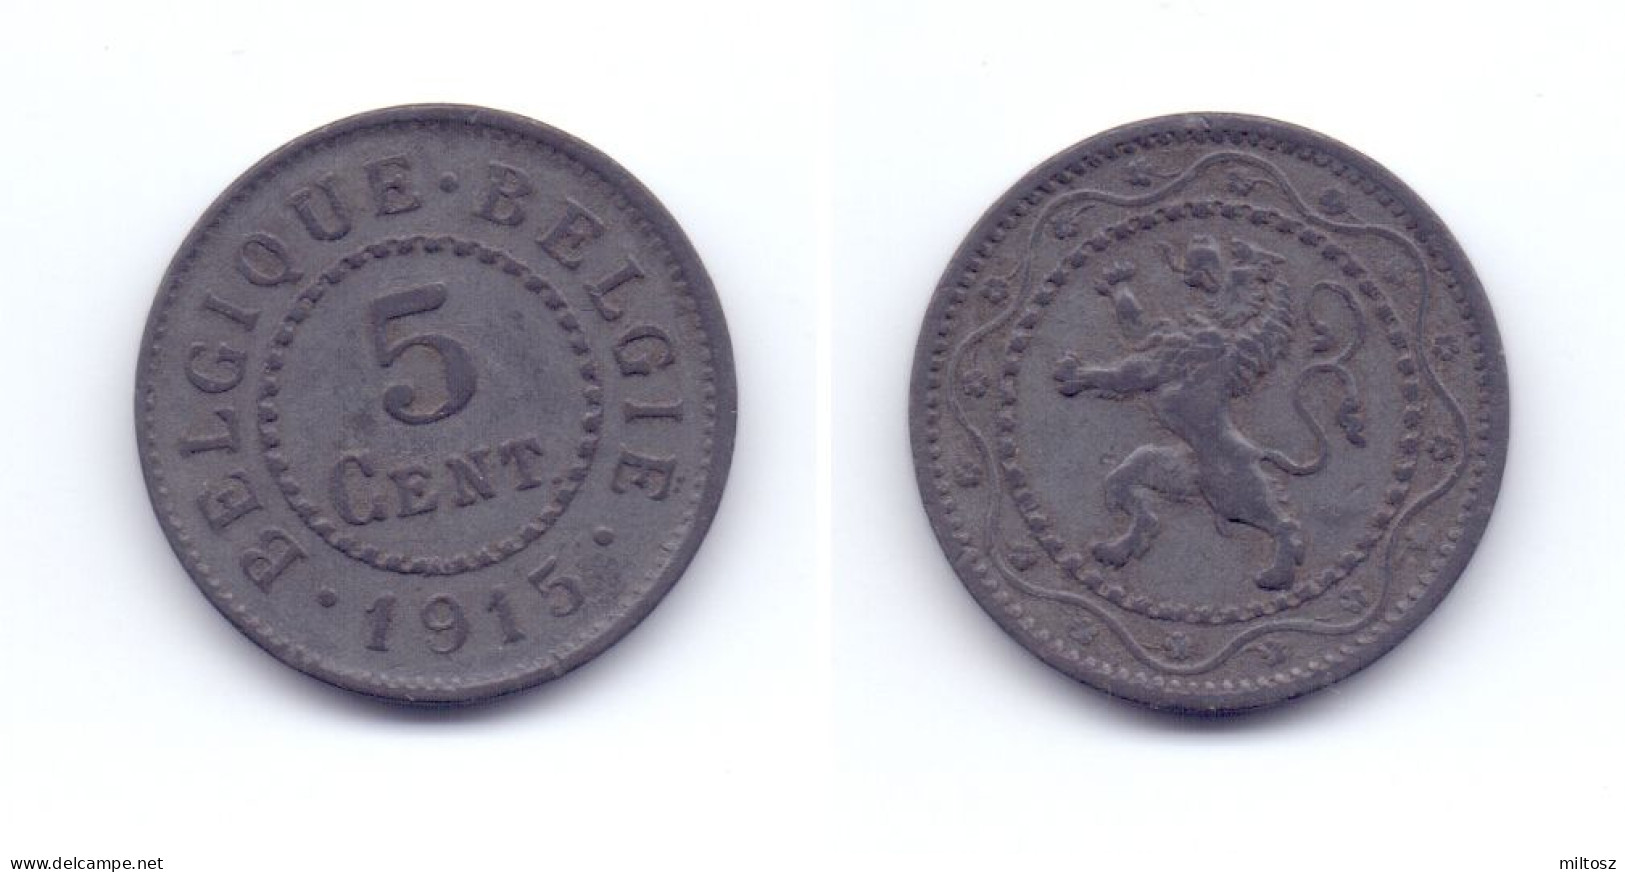 Belgium 5 Centimes 1915 WWi Issue - 5 Centimes